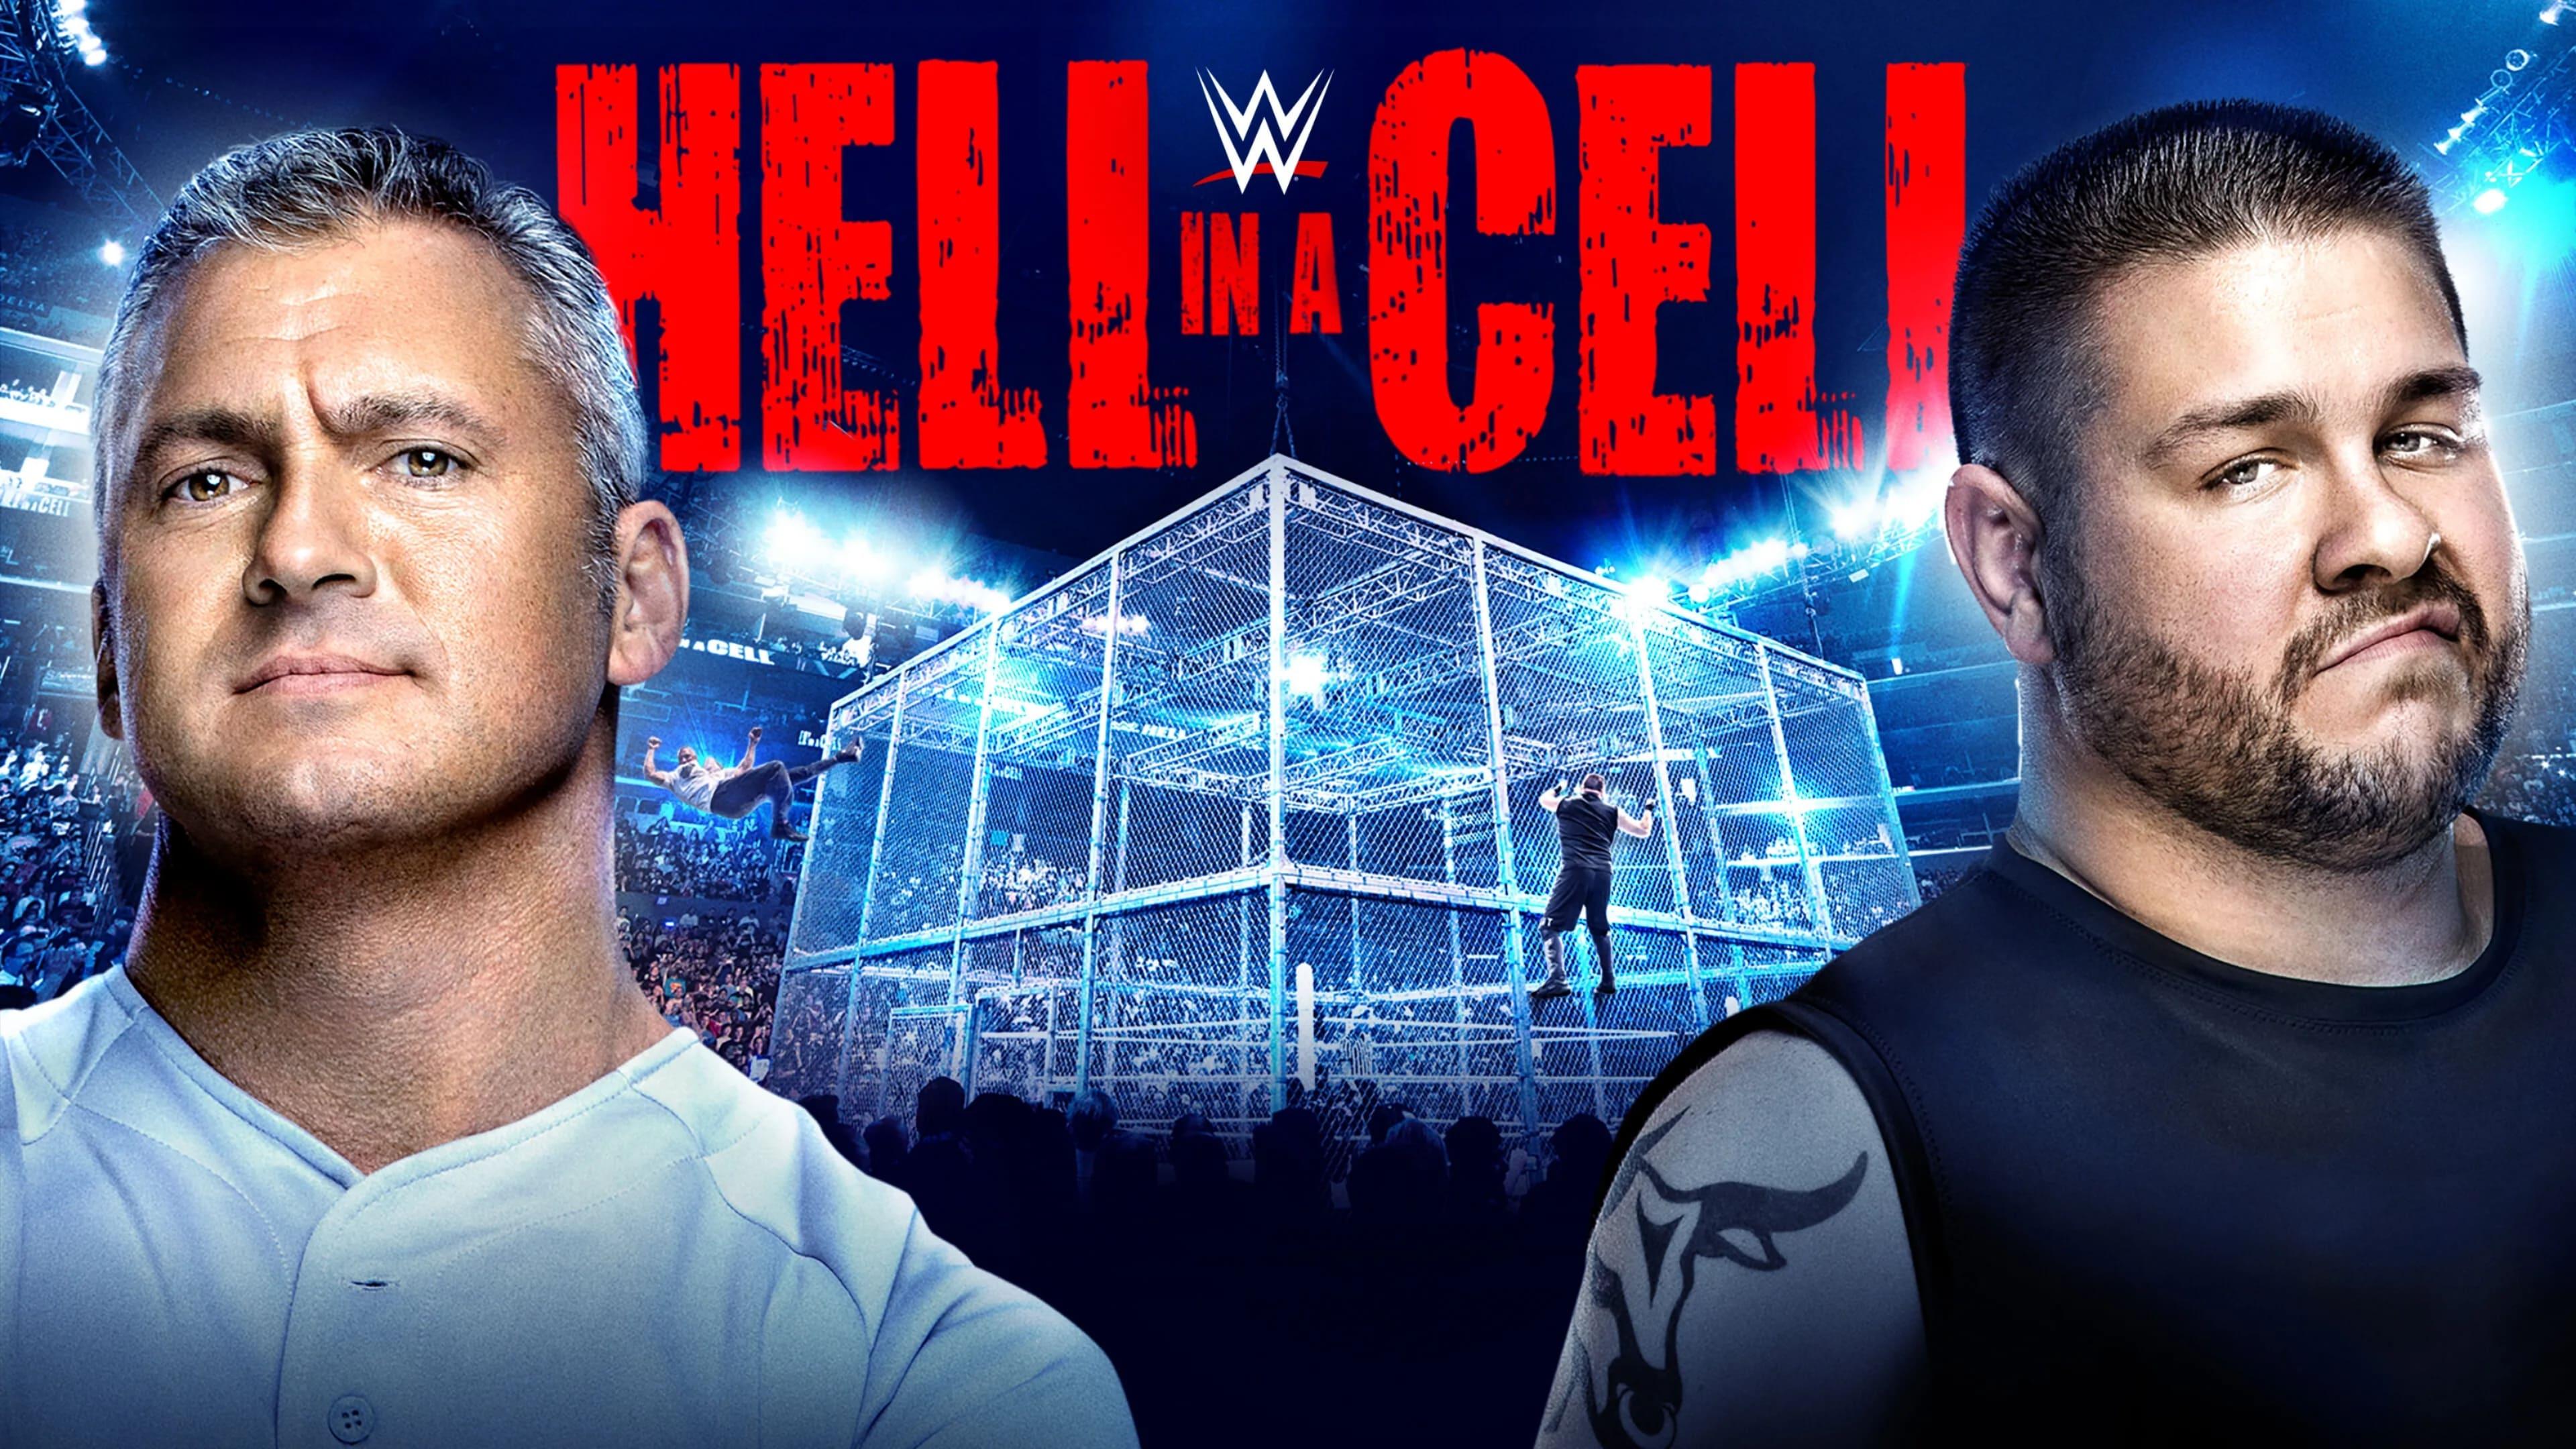 WWE Hell in a Cell 2017 backdrop